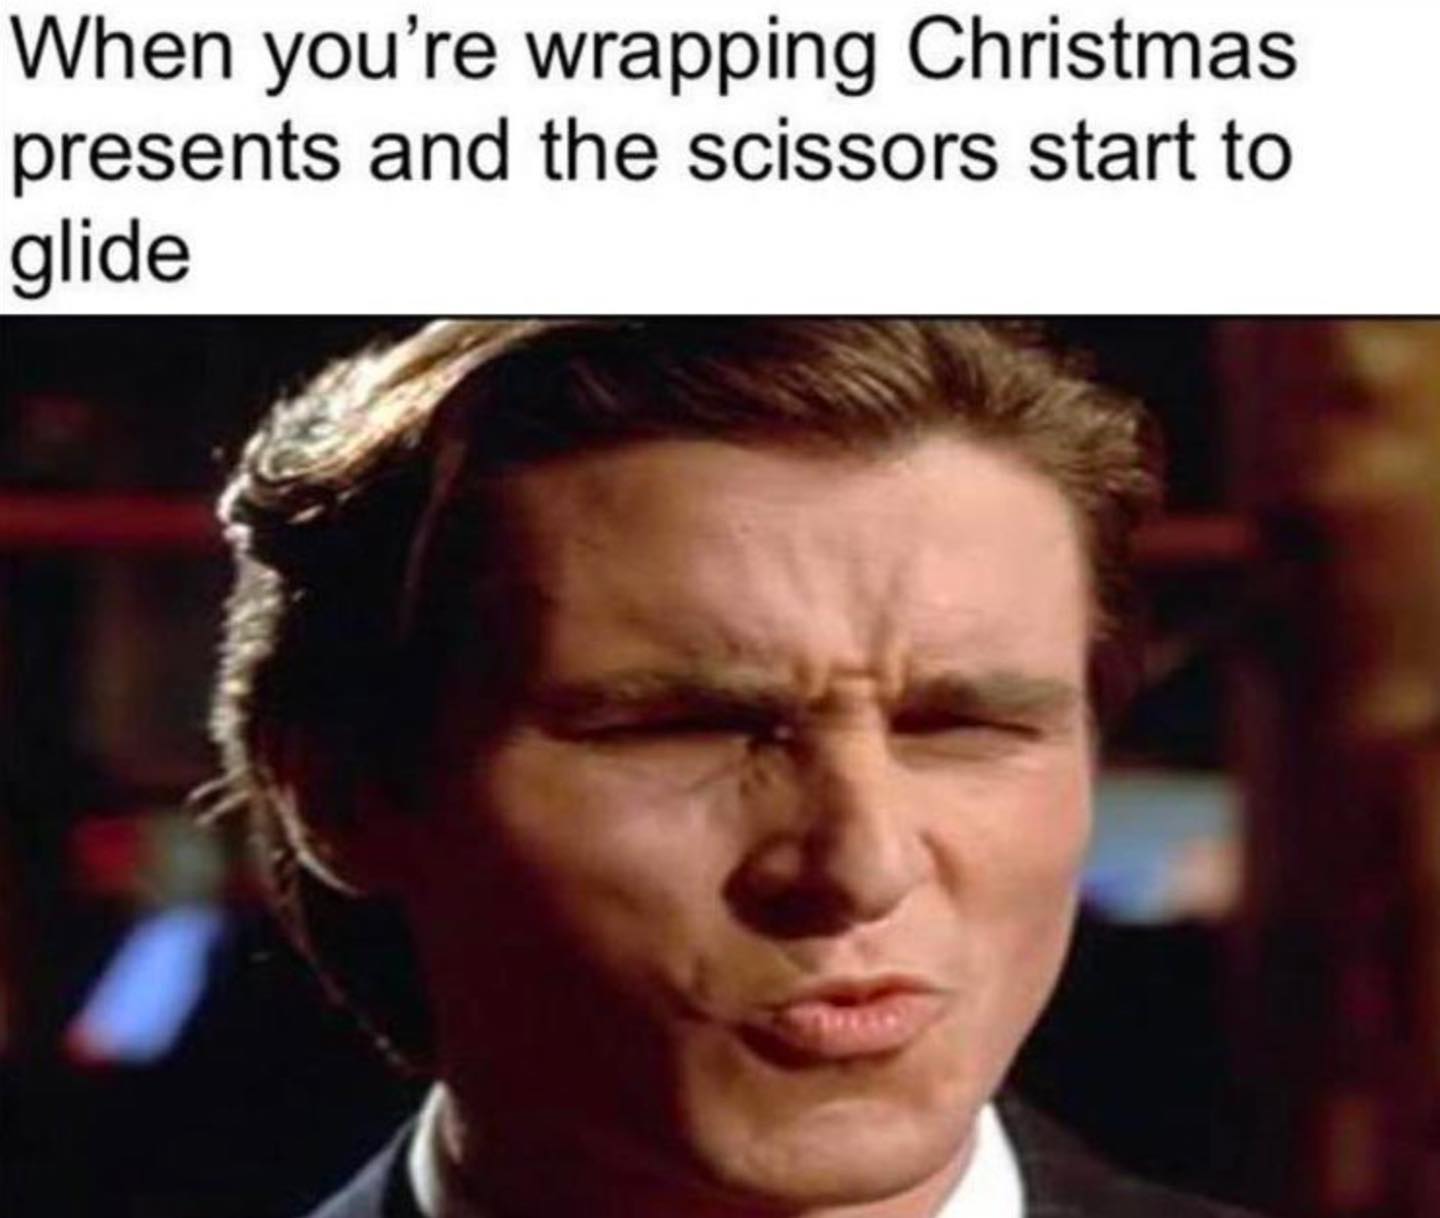 photo caption - When you're wrapping Christmas presents and the scissors start to glide